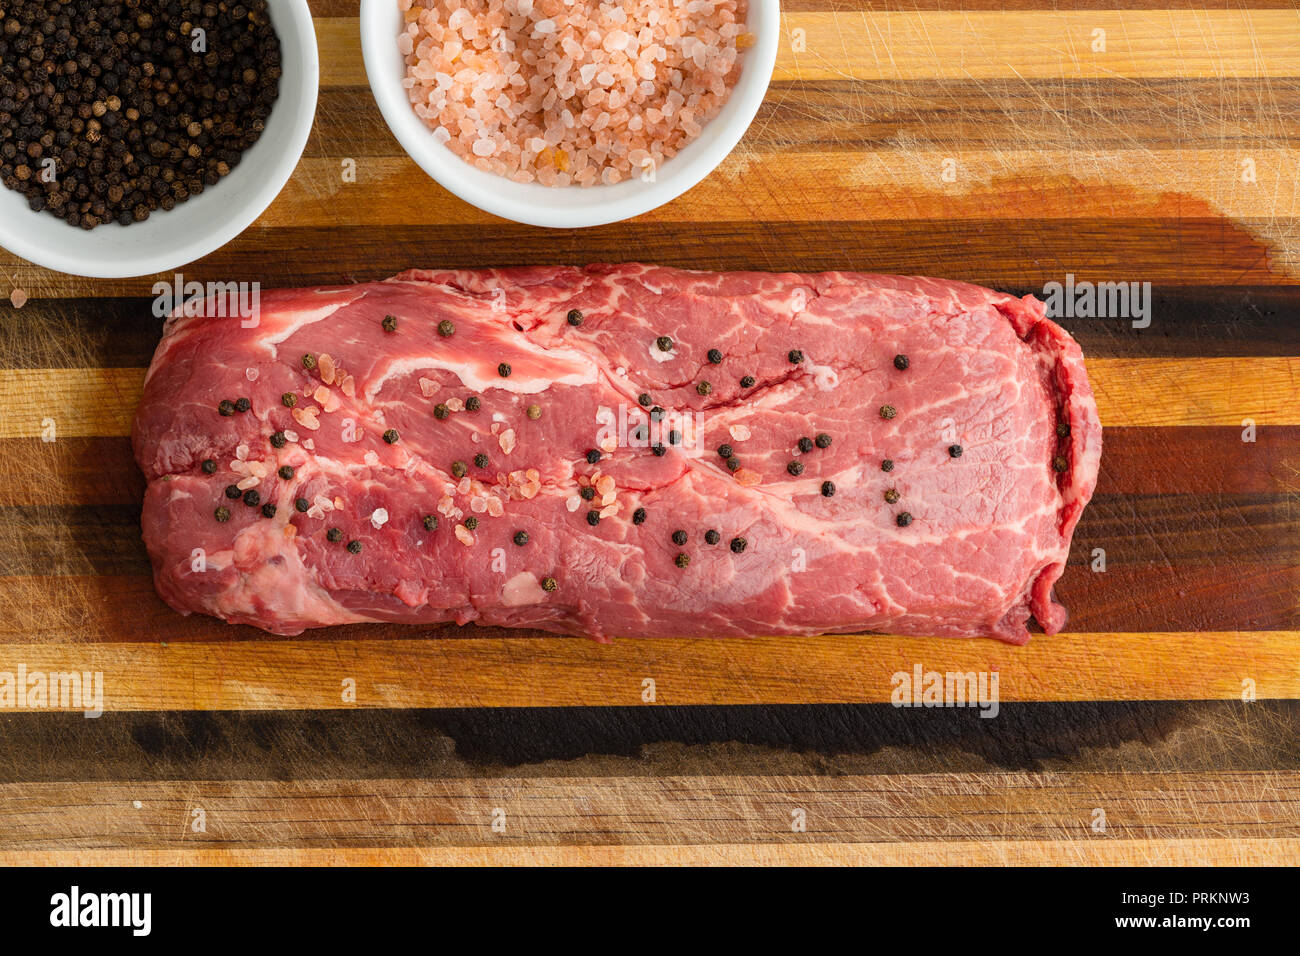 Rectangular slice of steak covered with tiny balls of pepper sitting on table next to bowls of seasoning Stock Photo